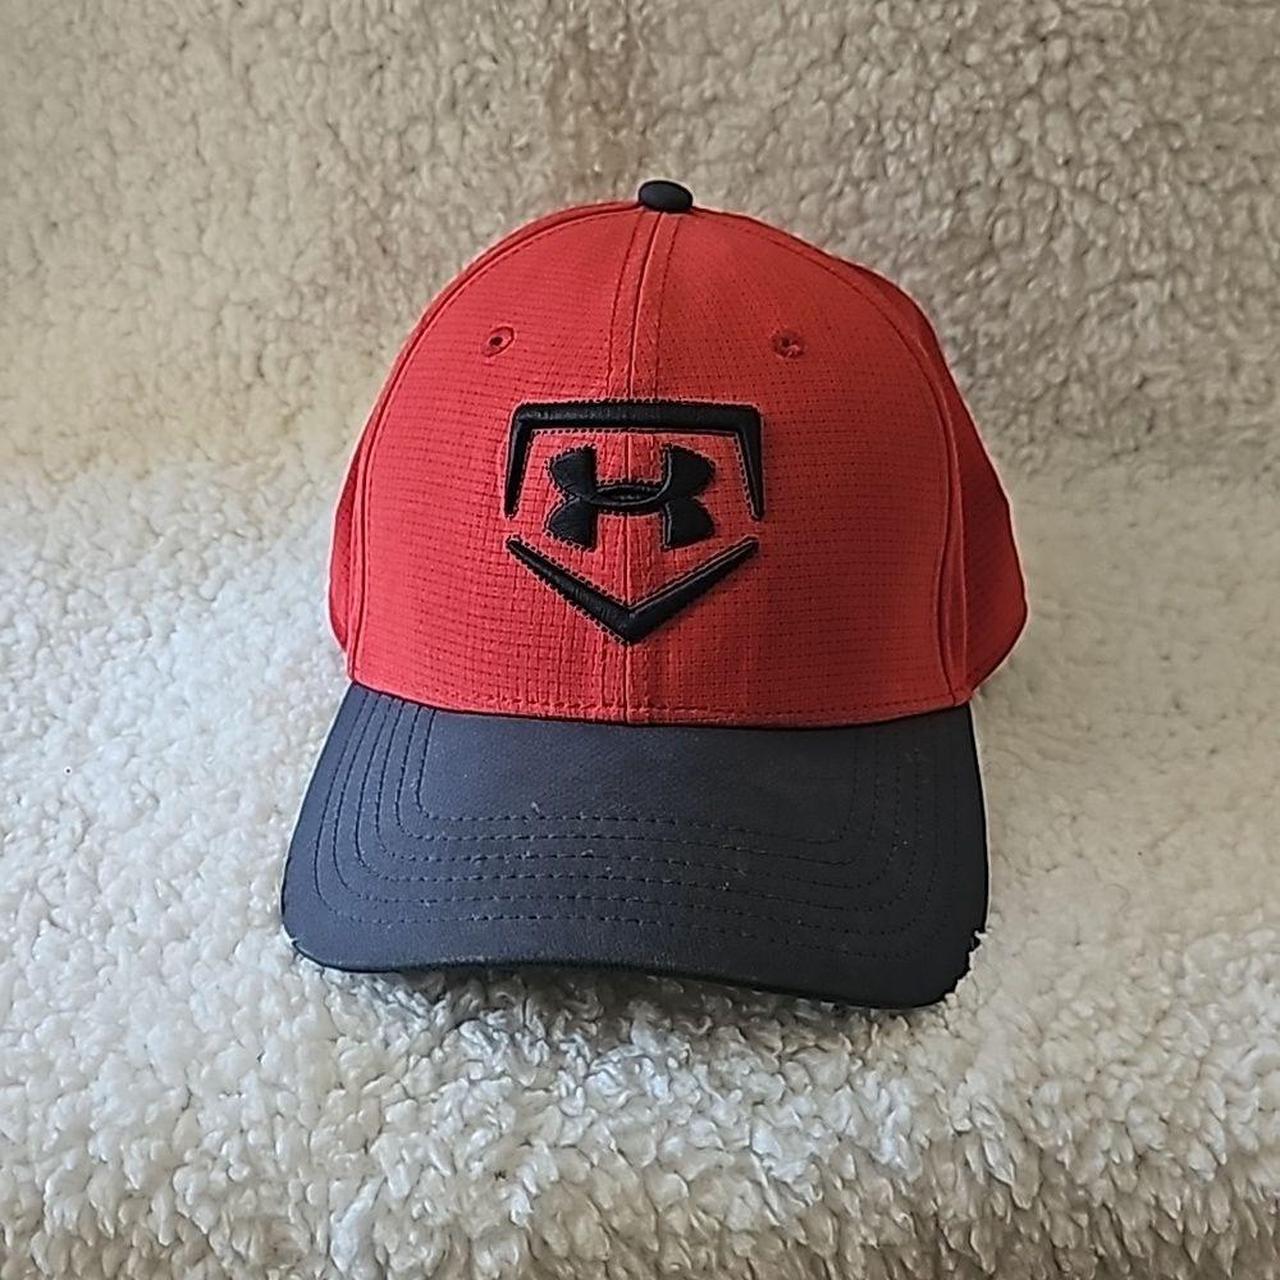 Black and red under Armour hat , size medium large